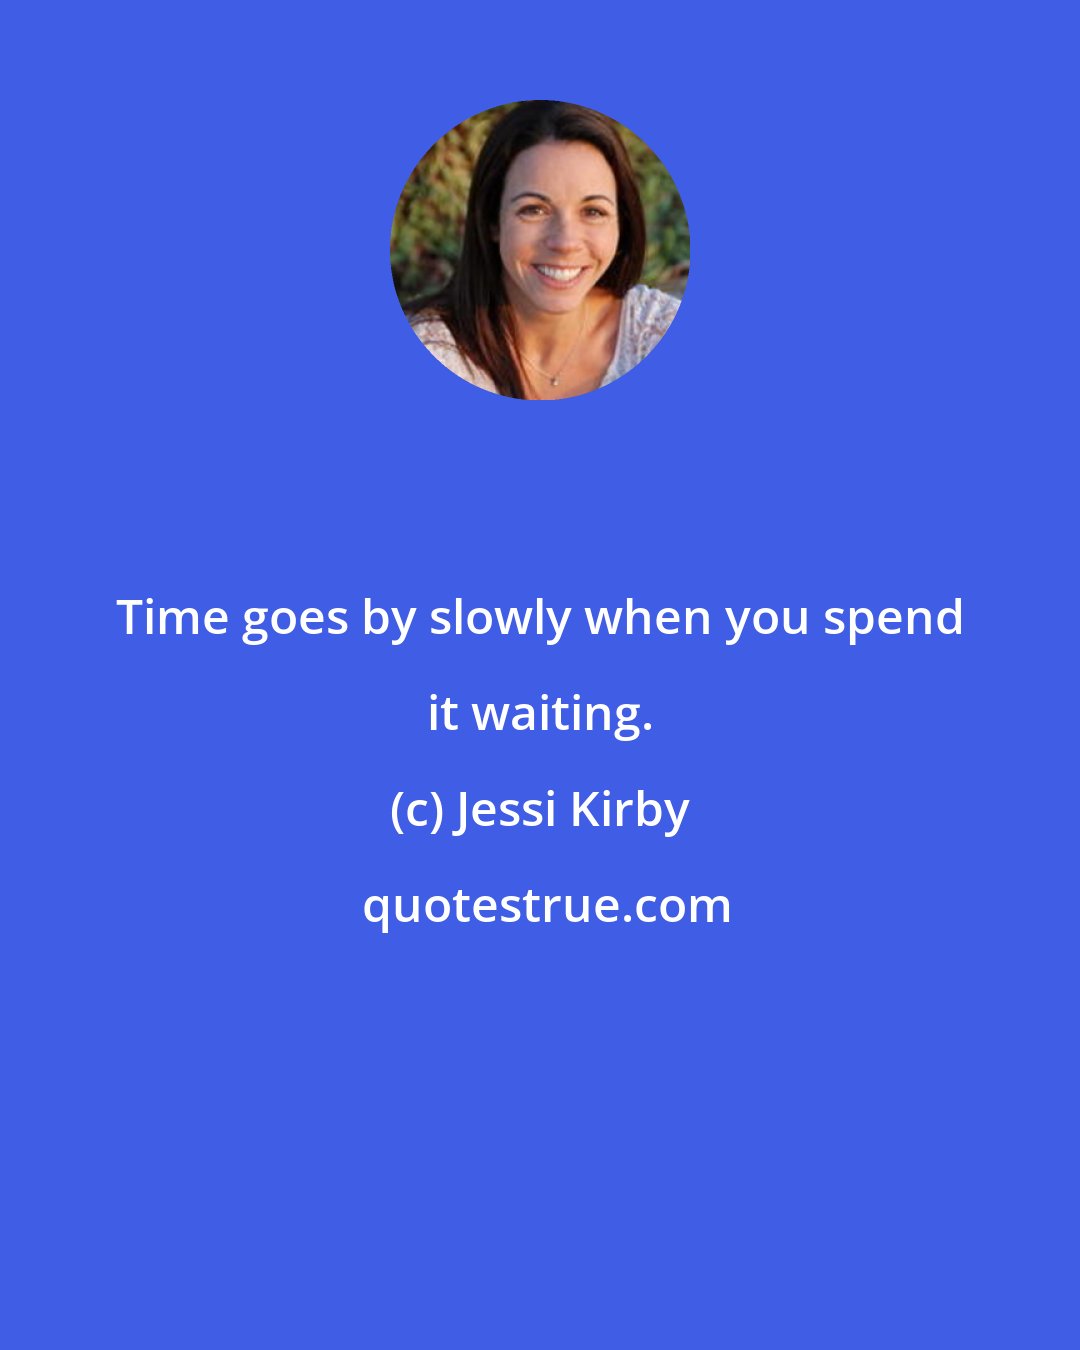 Jessi Kirby: Time goes by slowly when you spend it waiting.